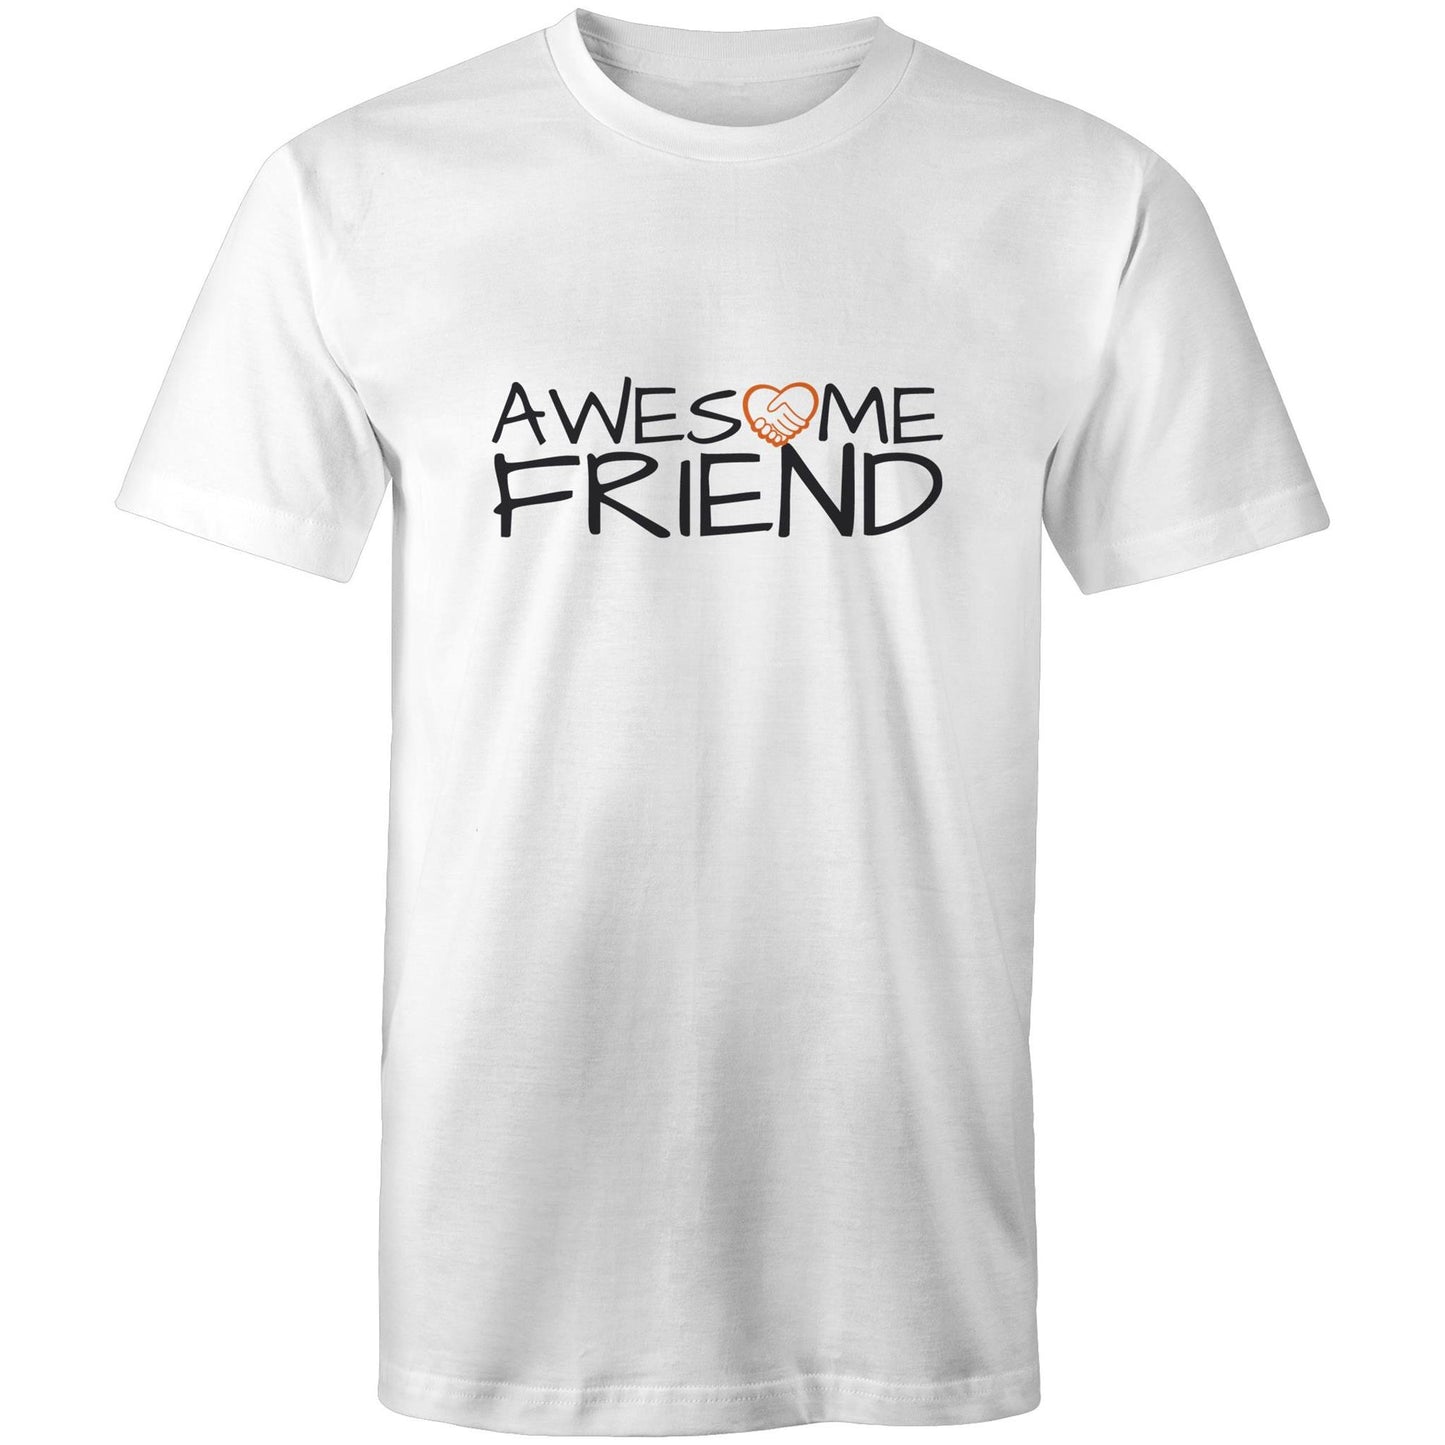 Awesome Friend T-shirt